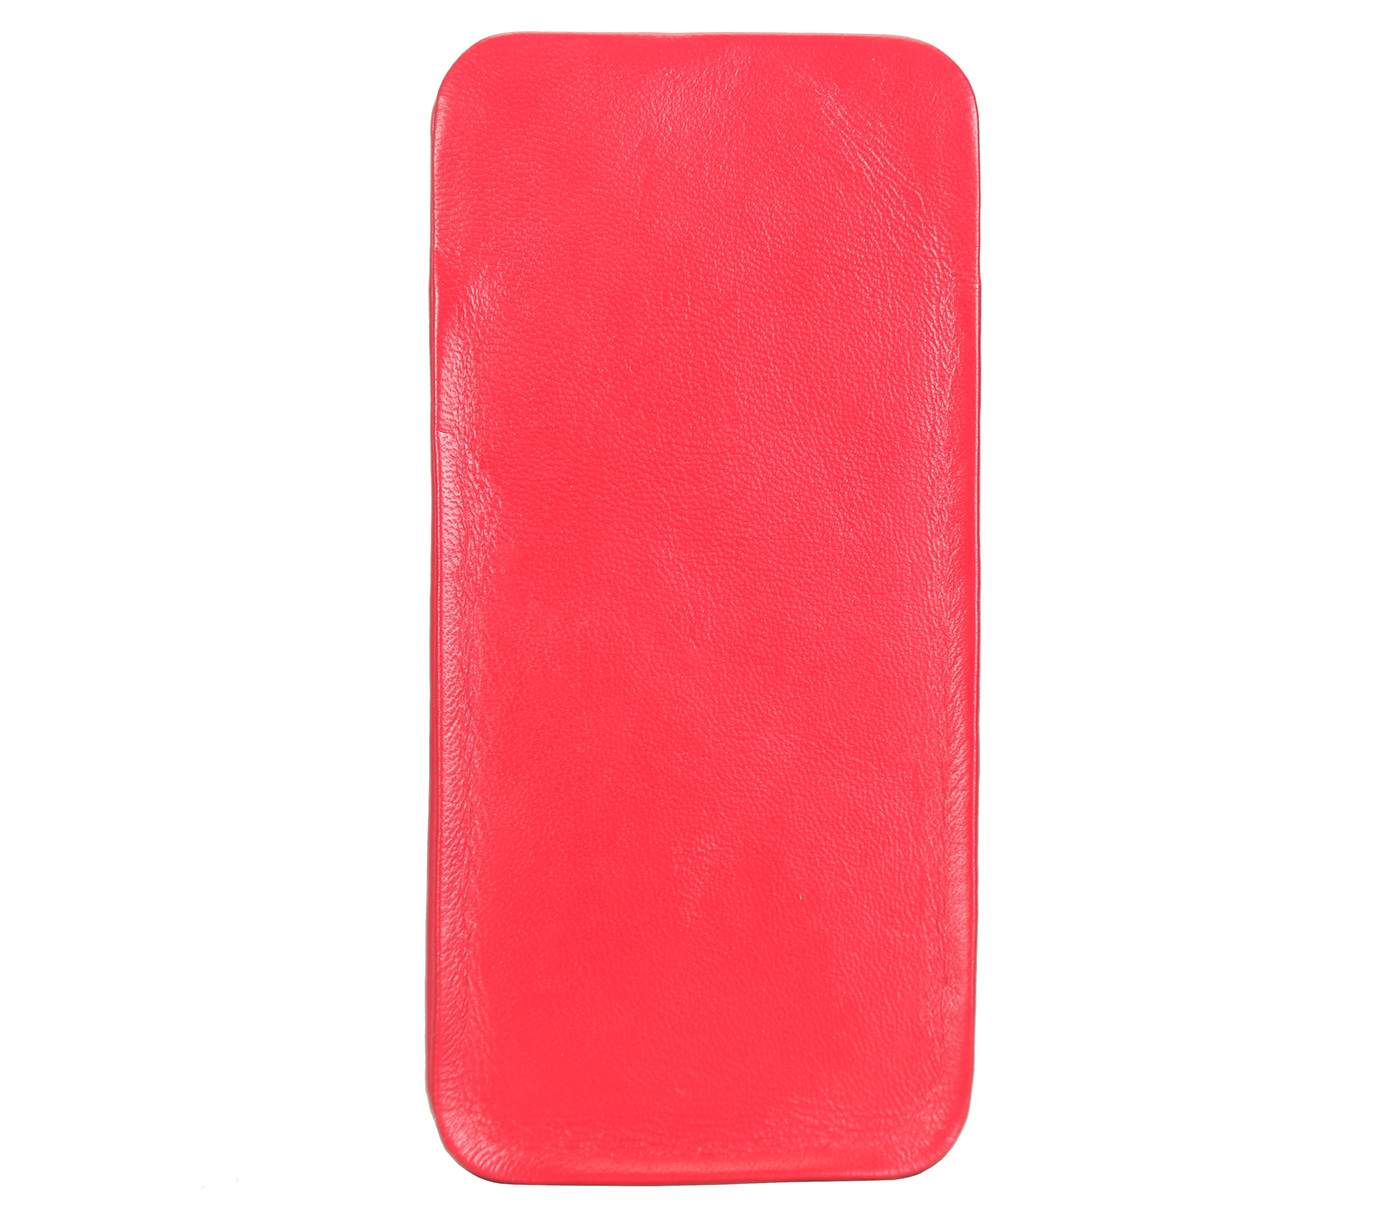 Spectacle Case--Soft stitch free spectacle case in Genuine Leather - Red